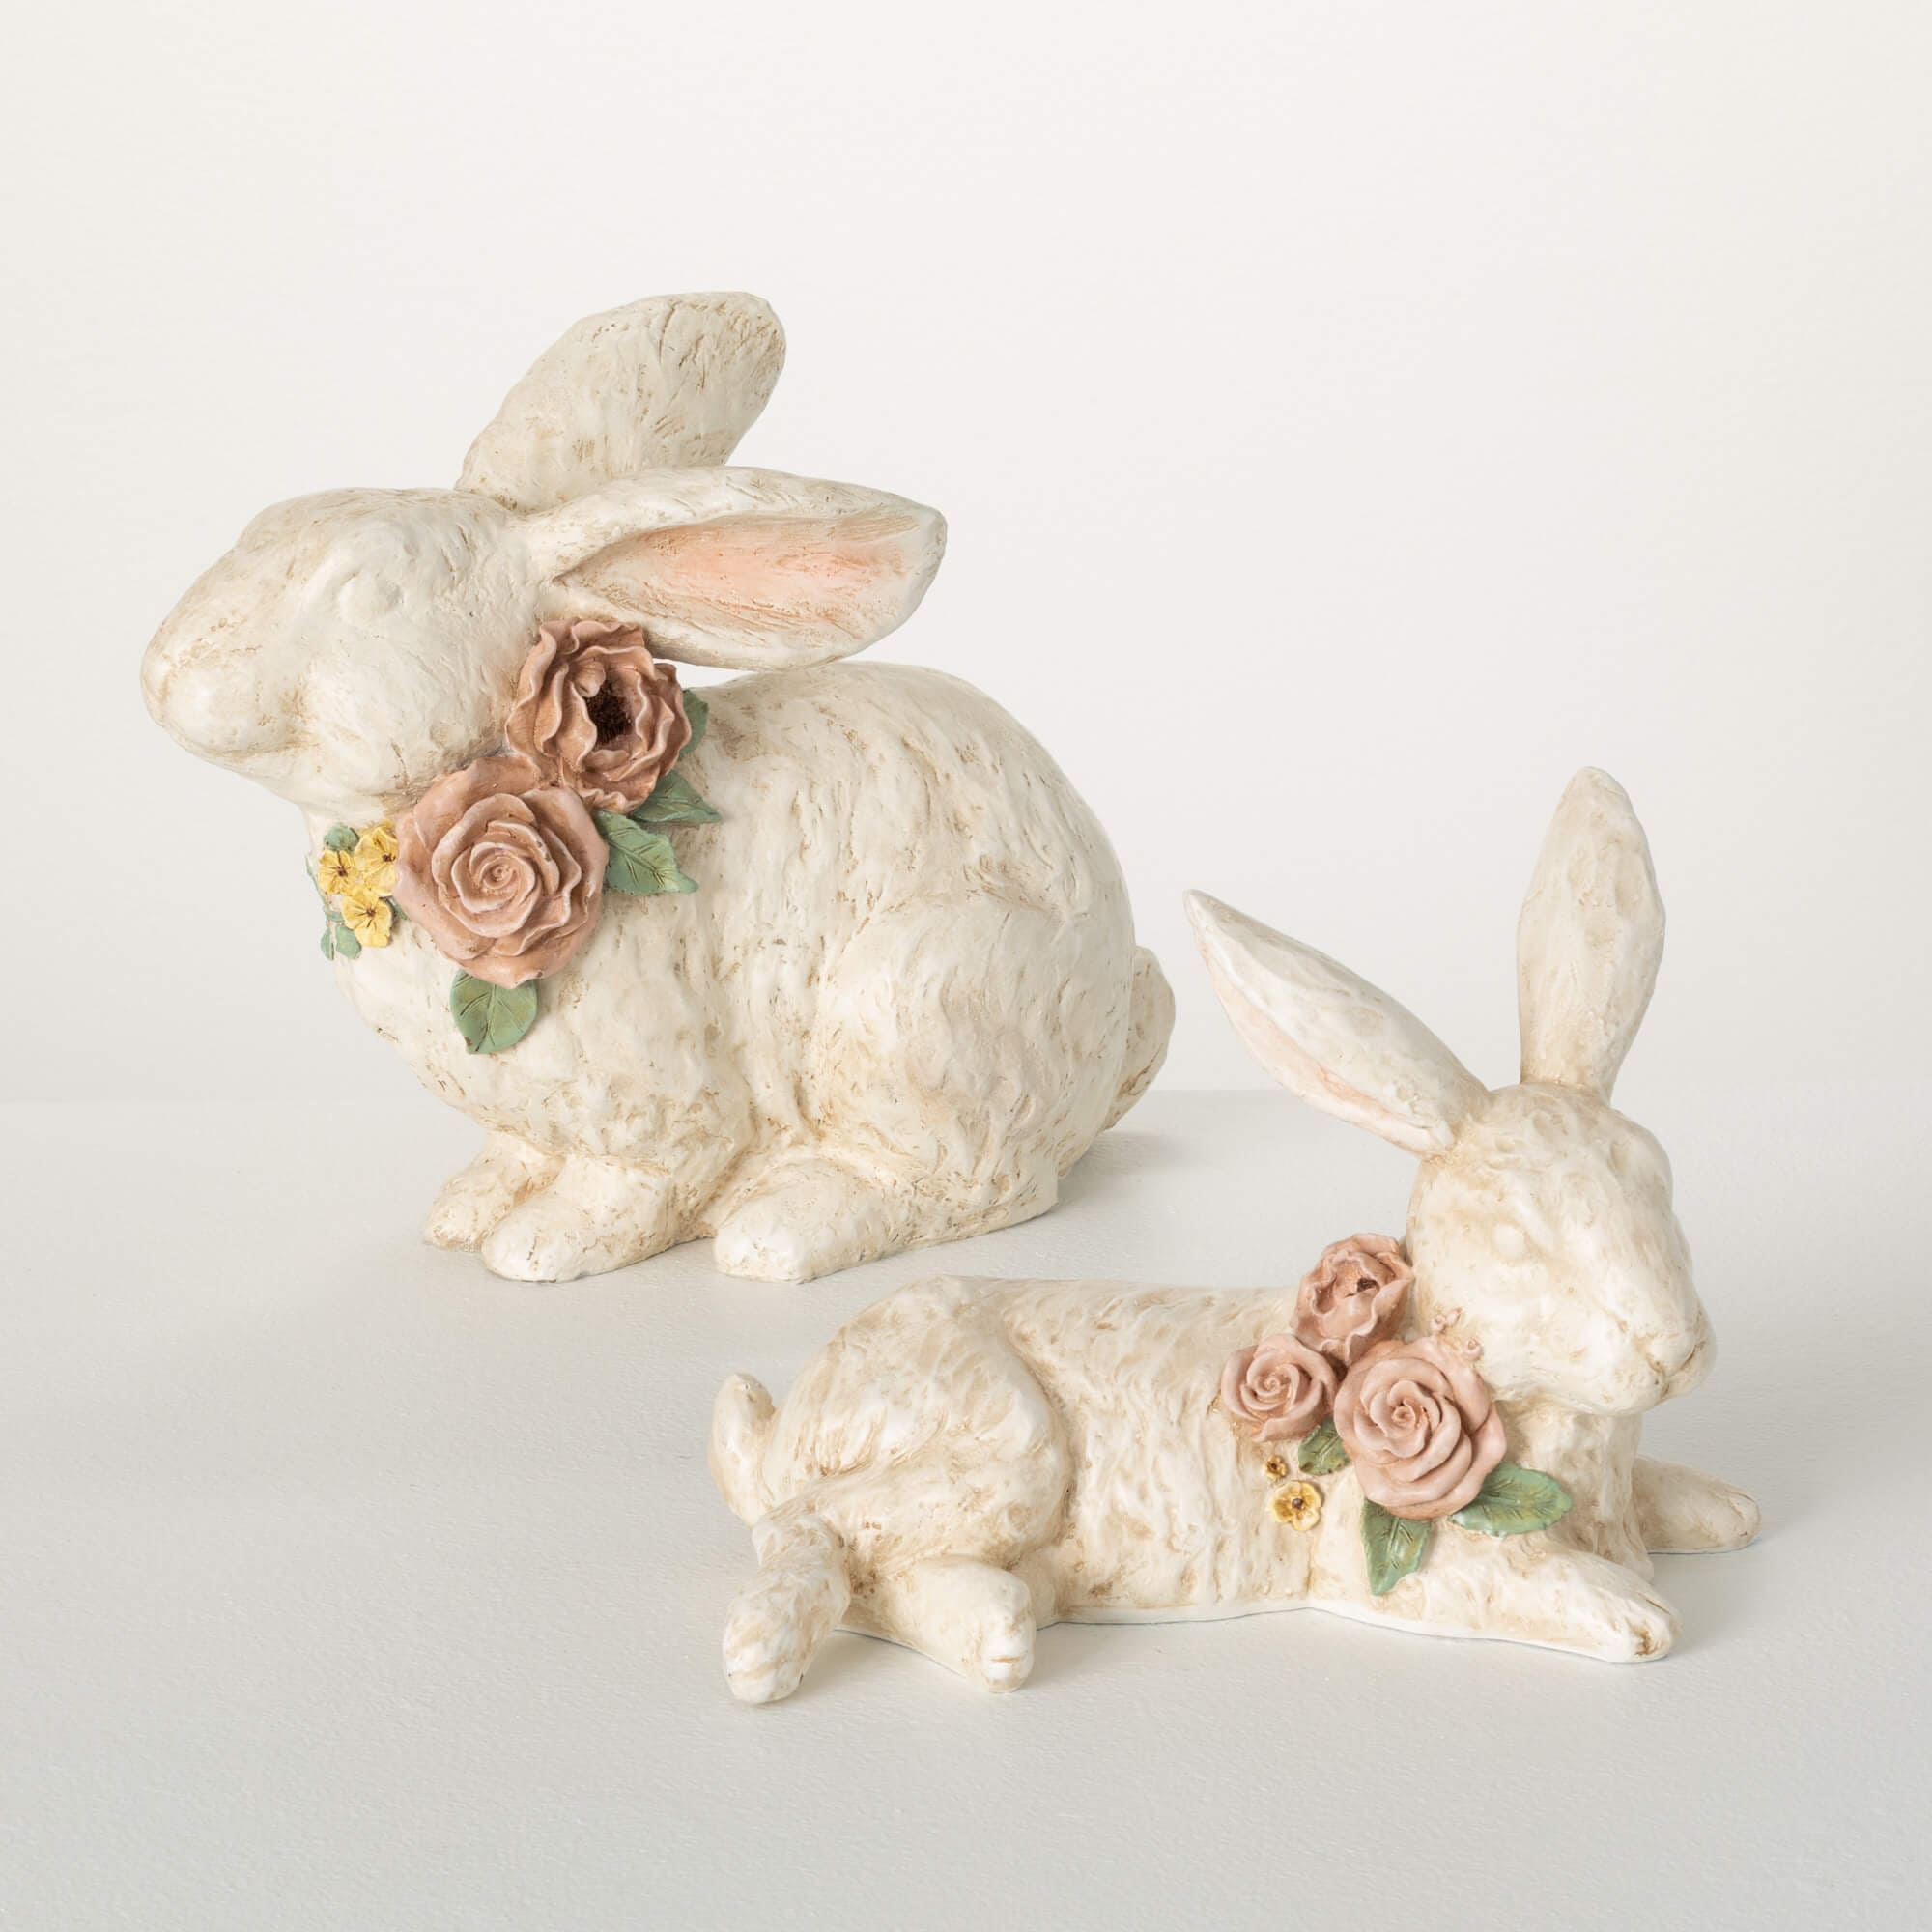 Resting Bunny Figurine Pair Elevate Home Decor - Sculptures & Statues